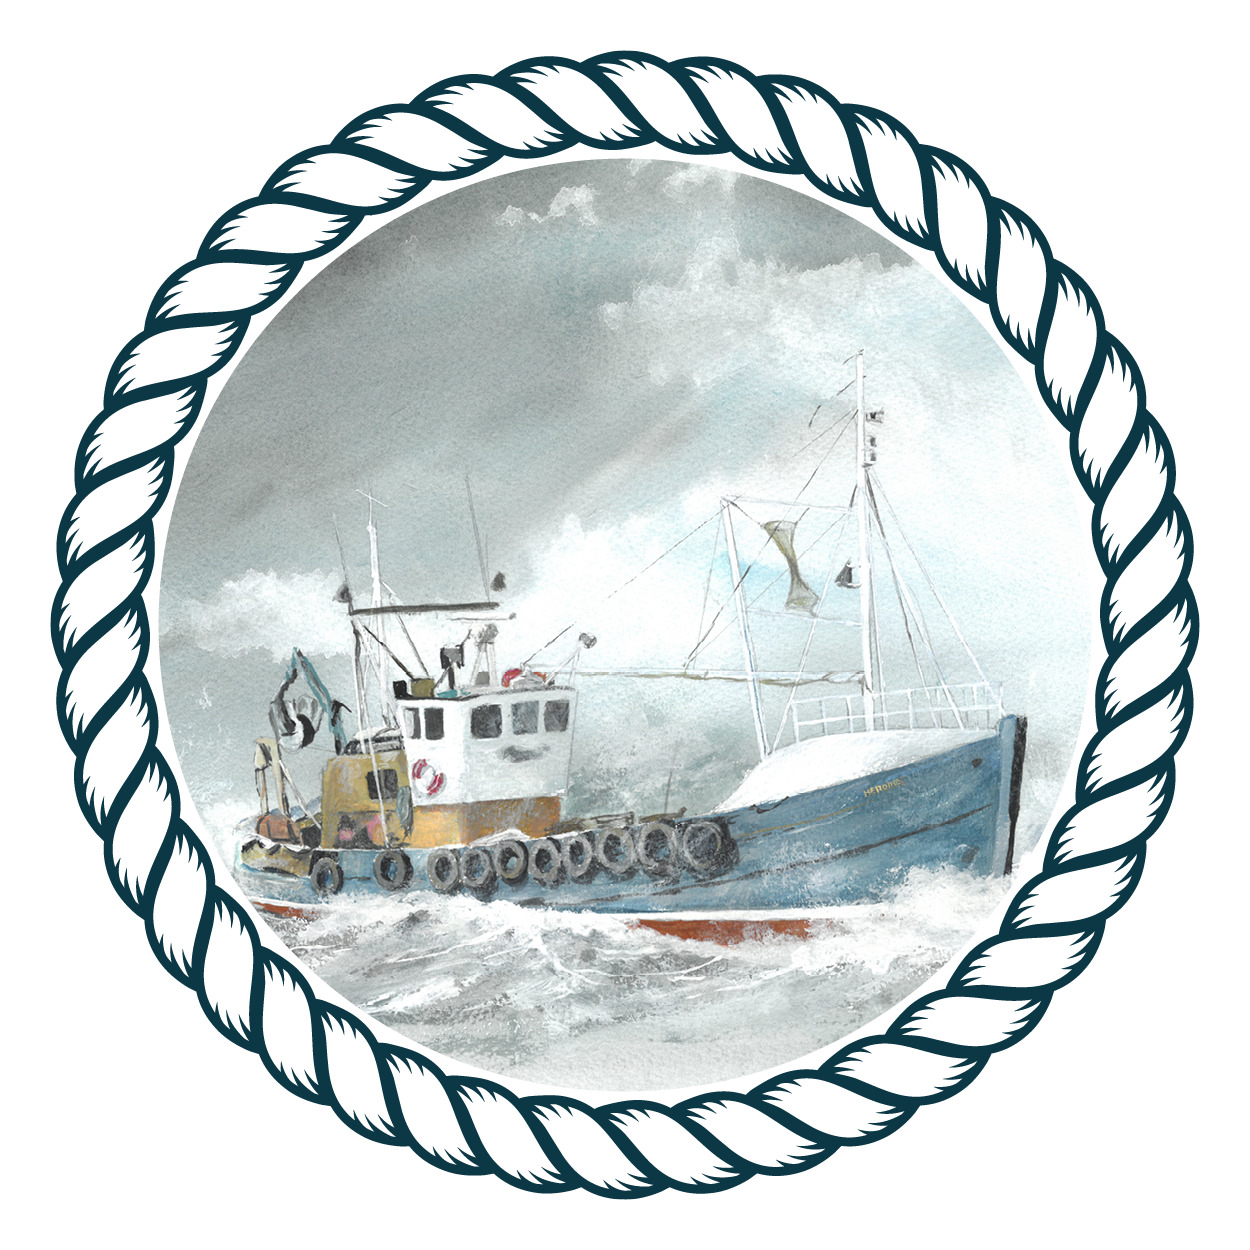 paint effect image of Sulaire Fishing Boat on rough sea waves in rope border